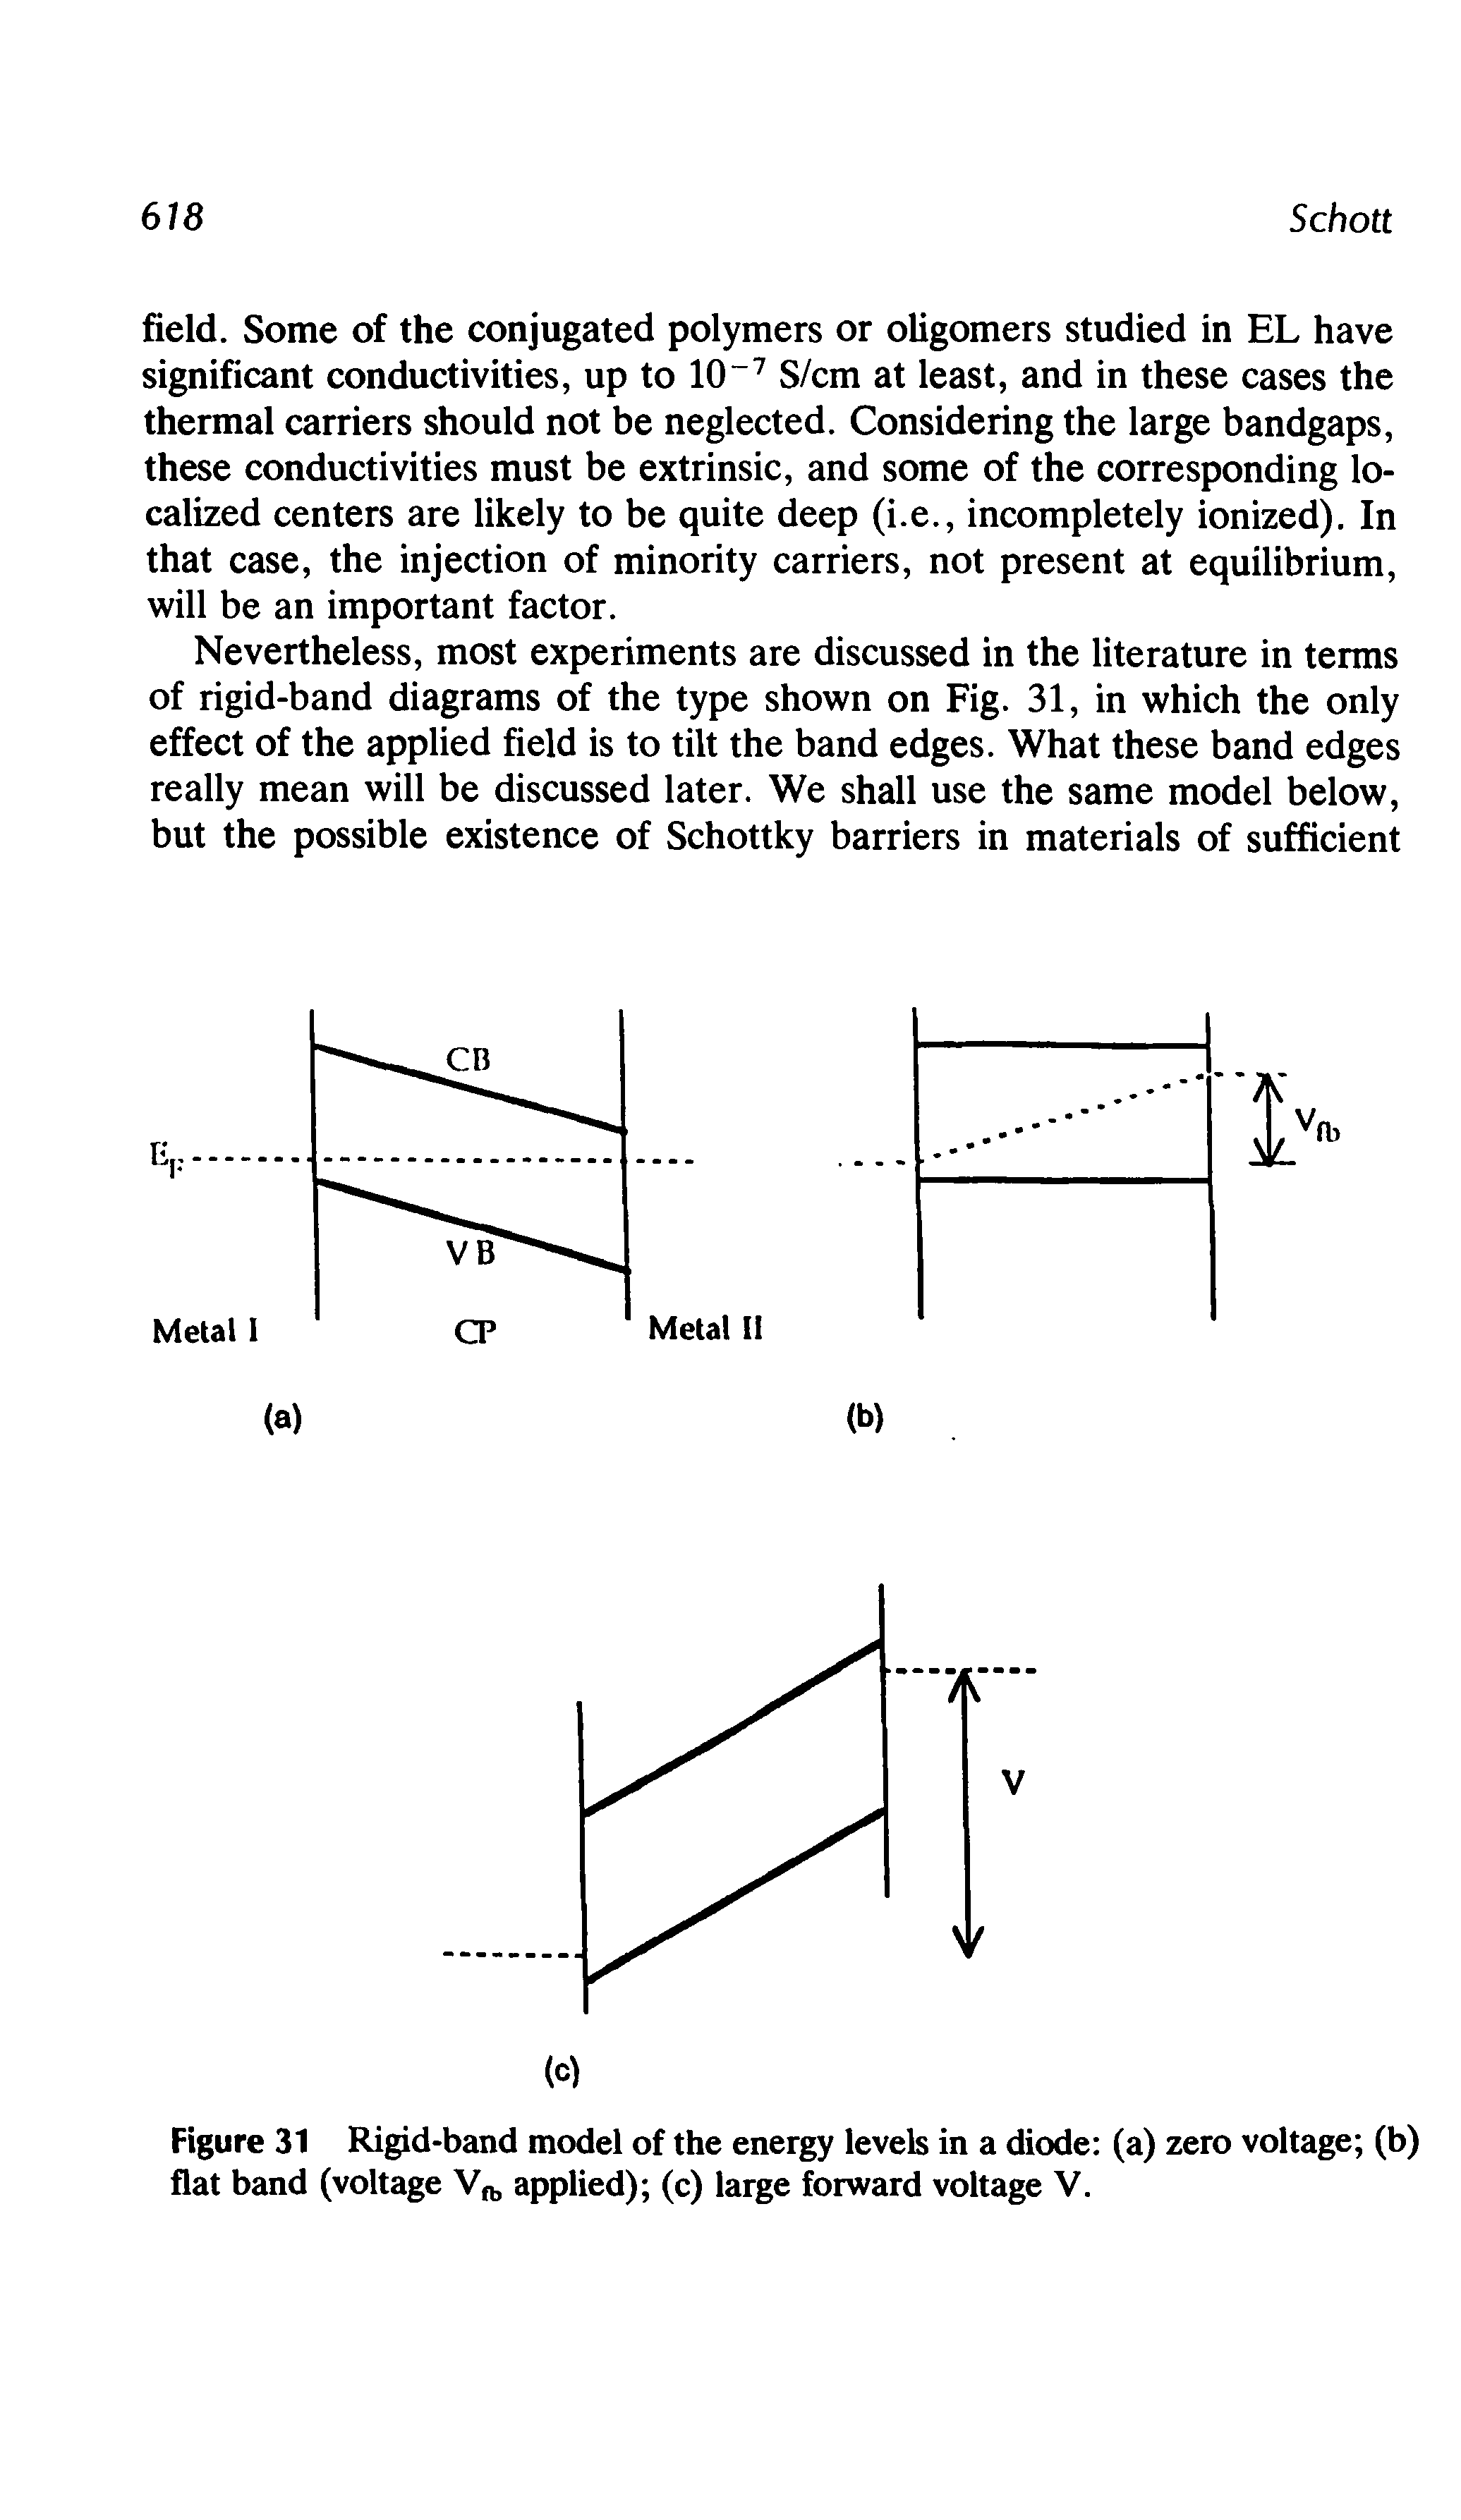 Figure 31 Rigid-band model of the energy levels in a diode (a) zero voltage (b) flat band (voltage Vn, applied) (c) large forward voltage V.